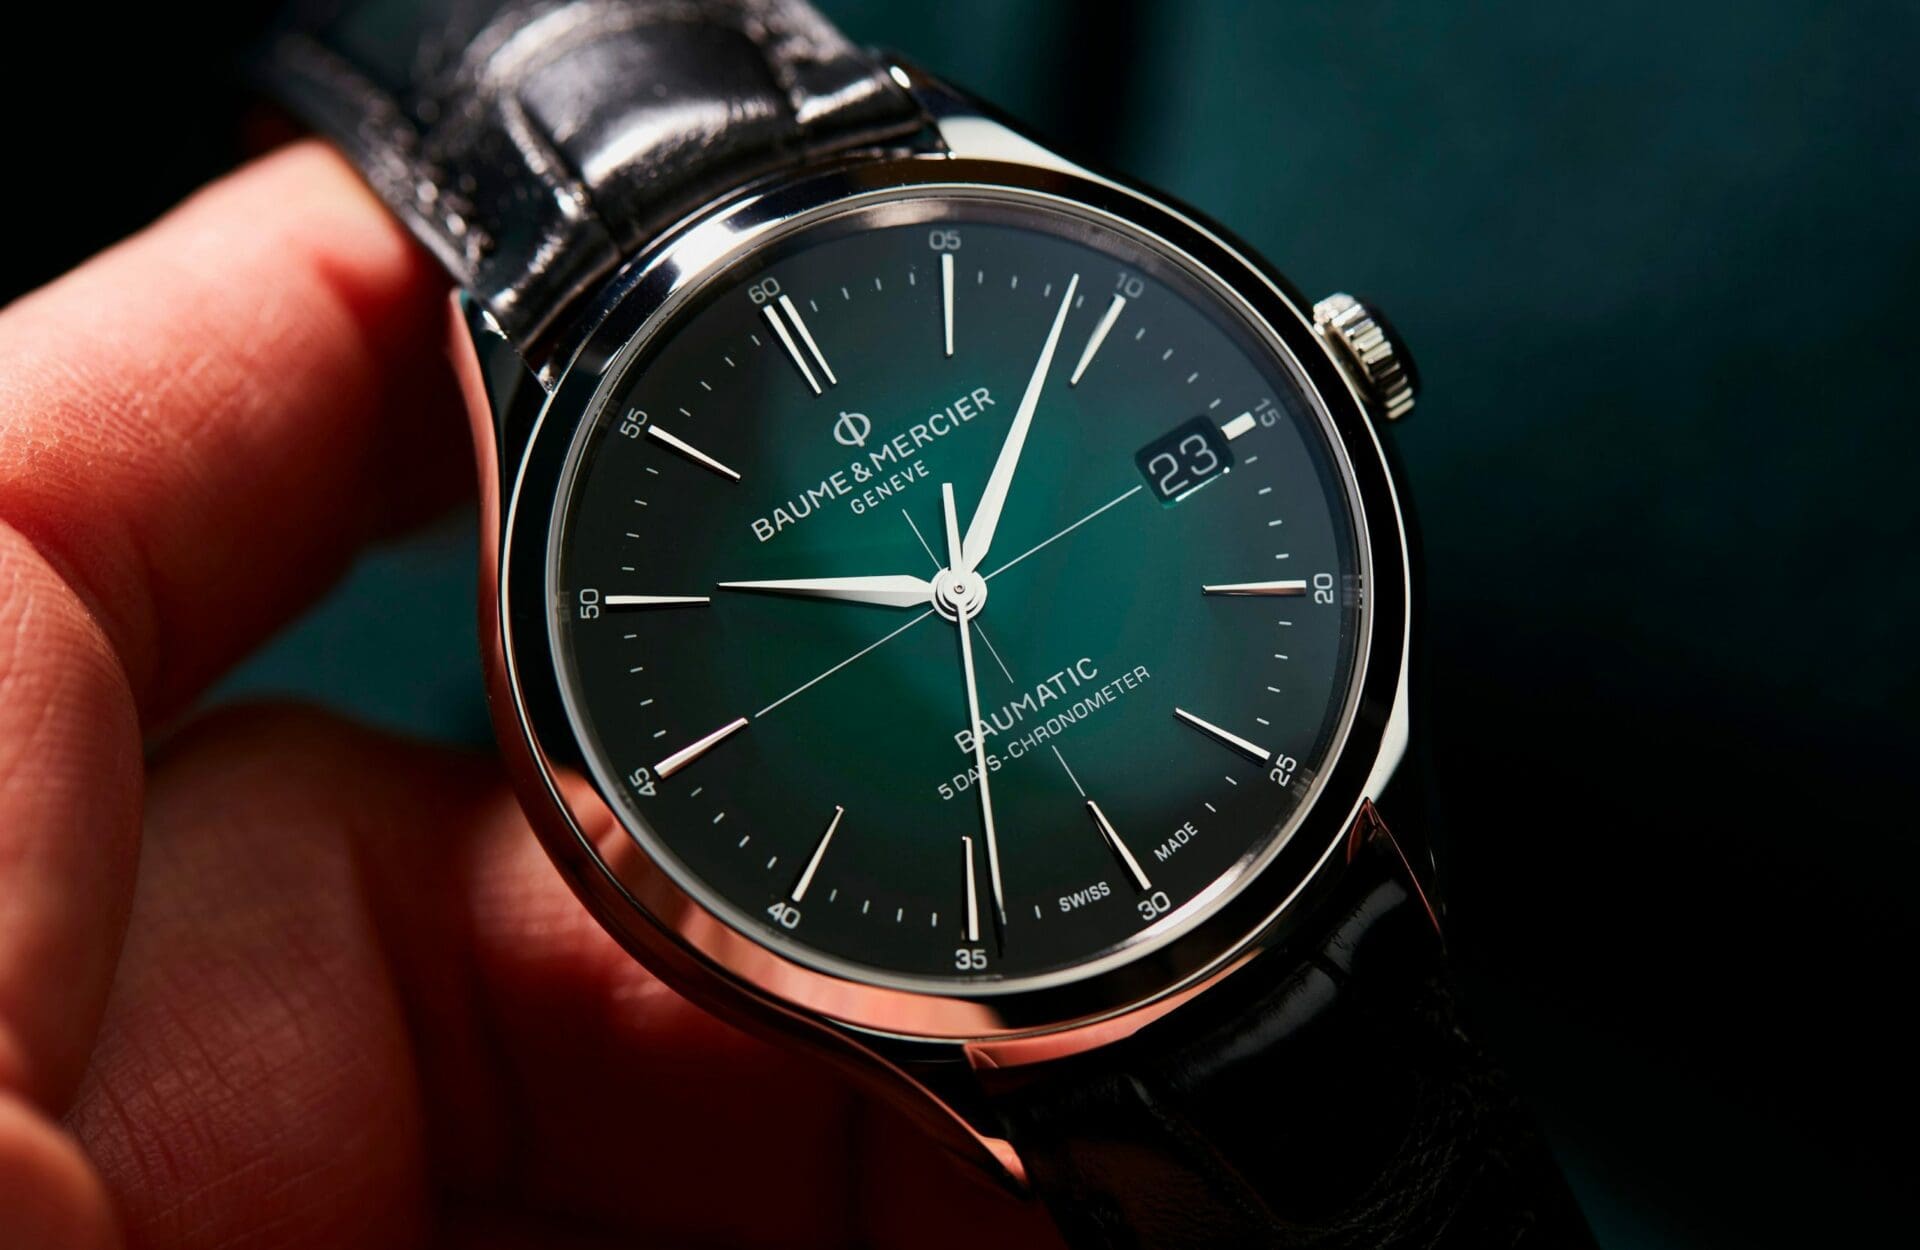 HANDS ON: The COSC-certified green goodness of the Baume & Mercier Clifton Baumatic 10592